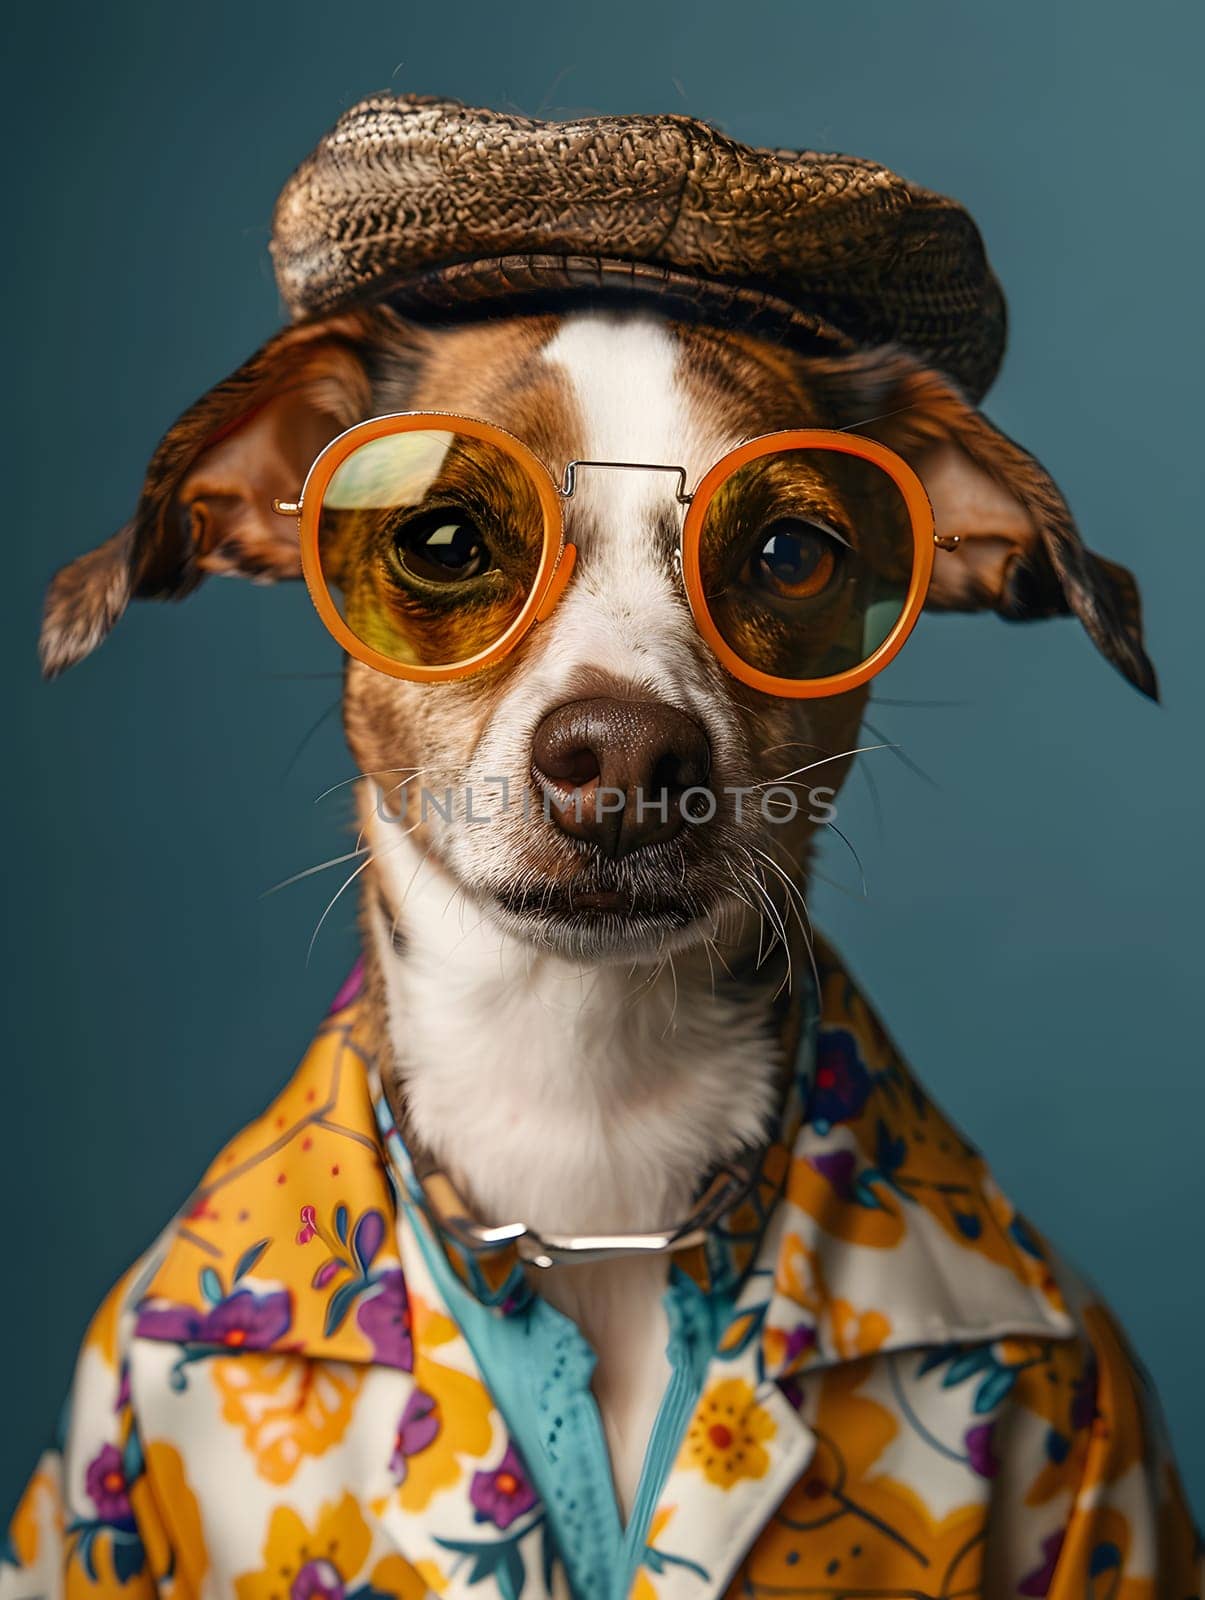 A carnivore dog breed wearing glasses, a hat, a floral shirt, and sunglasses by Nadtochiy